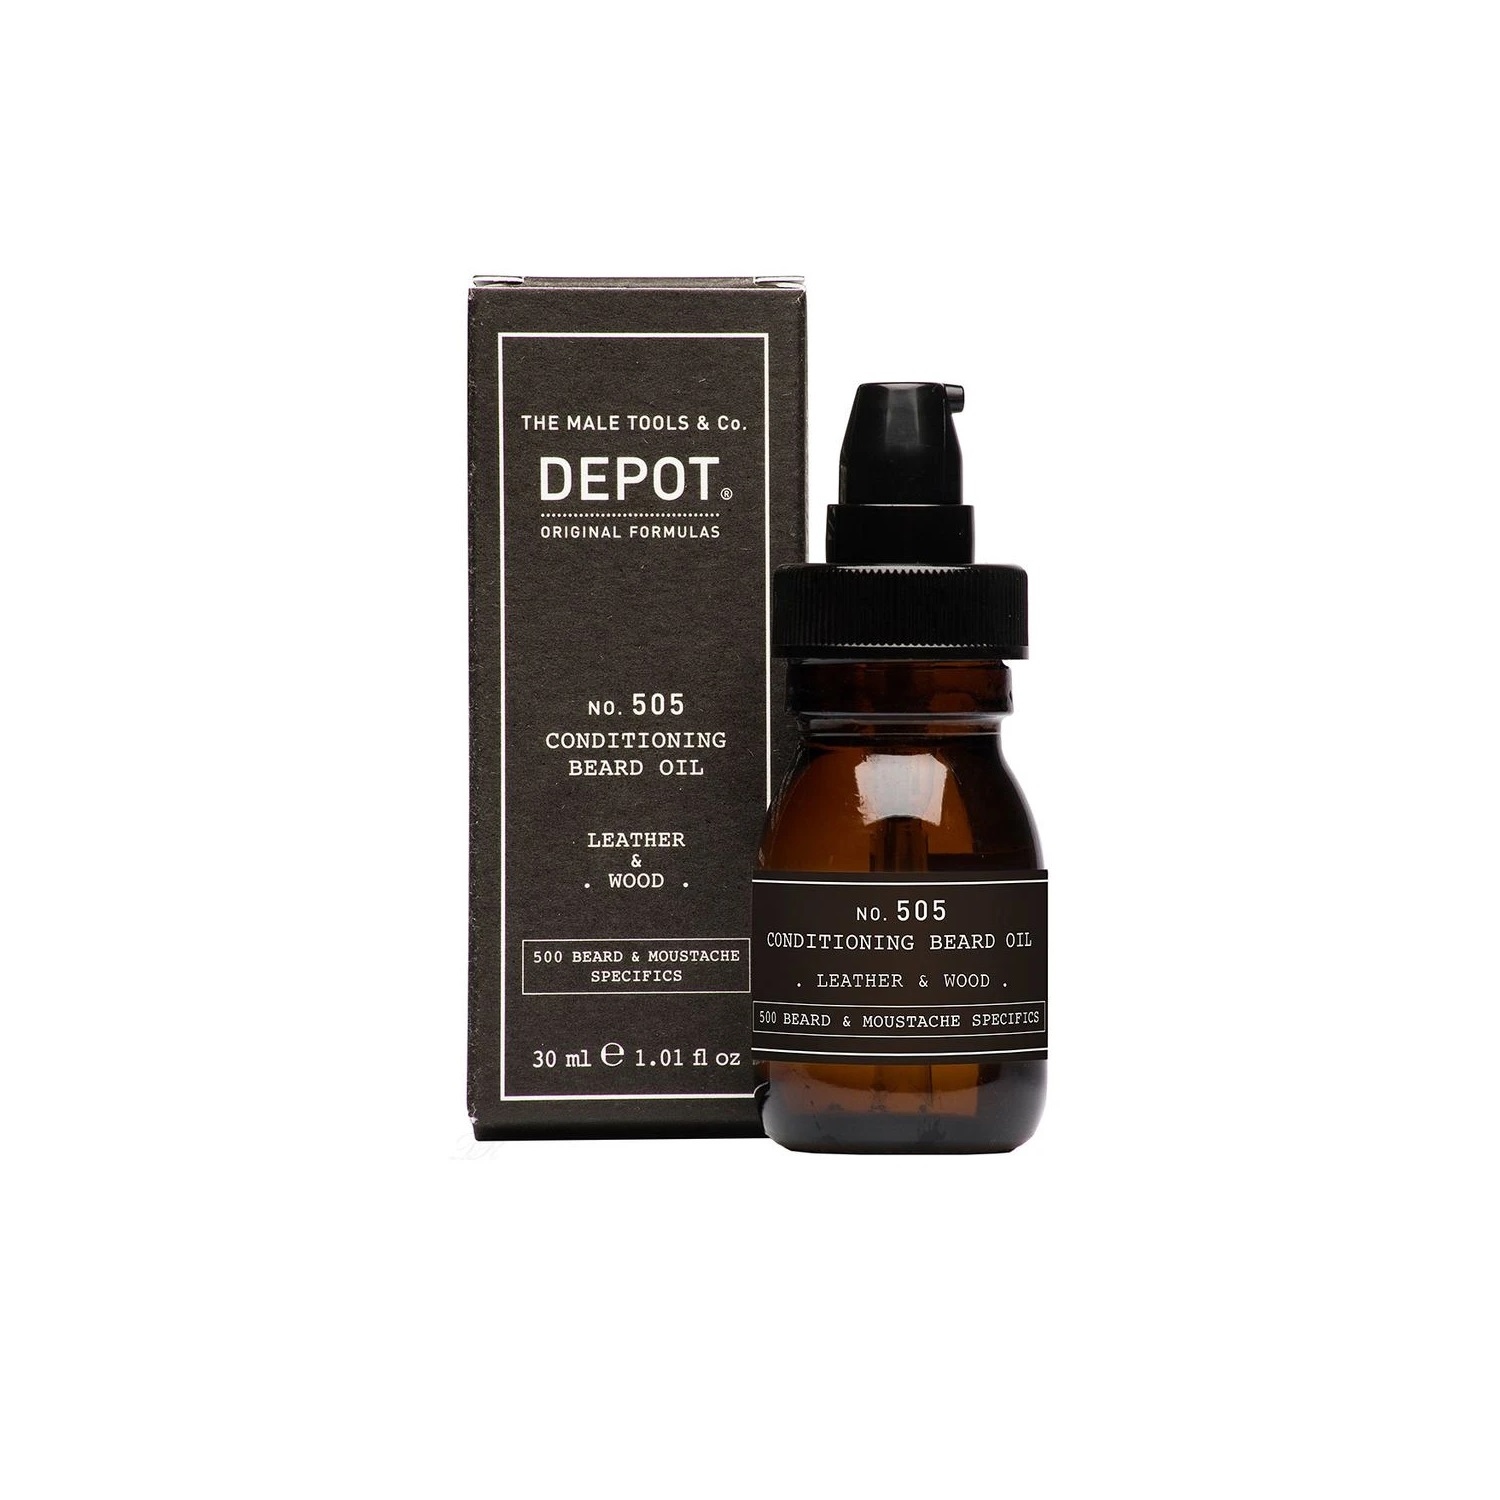 DEPOT No.505 CONDITIONING BEARD OIL LEATHER & WOOD